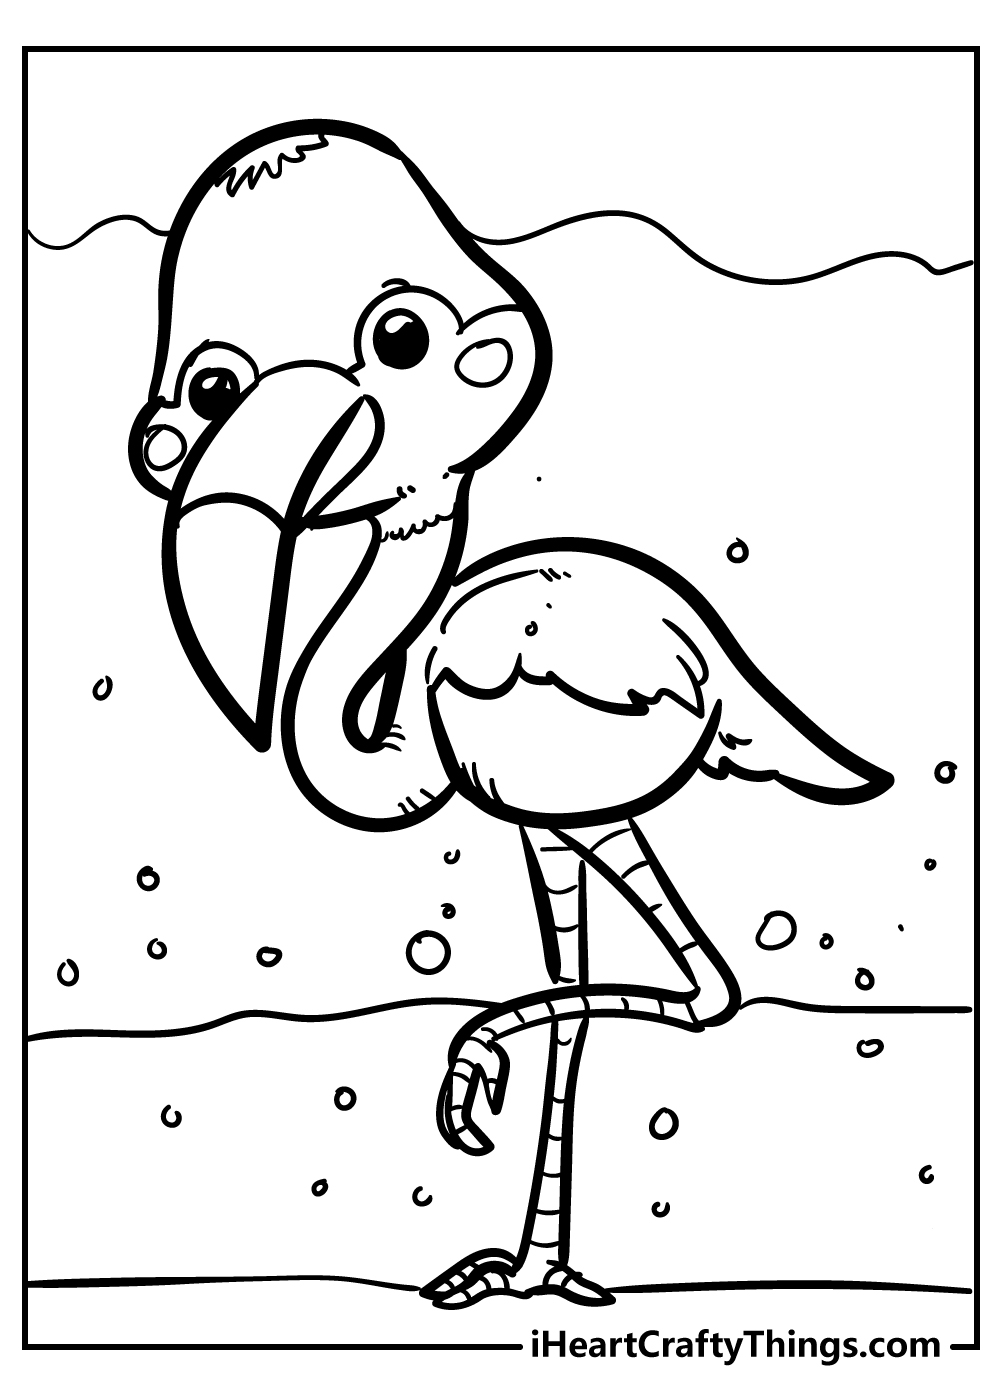 Bird Coloring Pages for kids free download